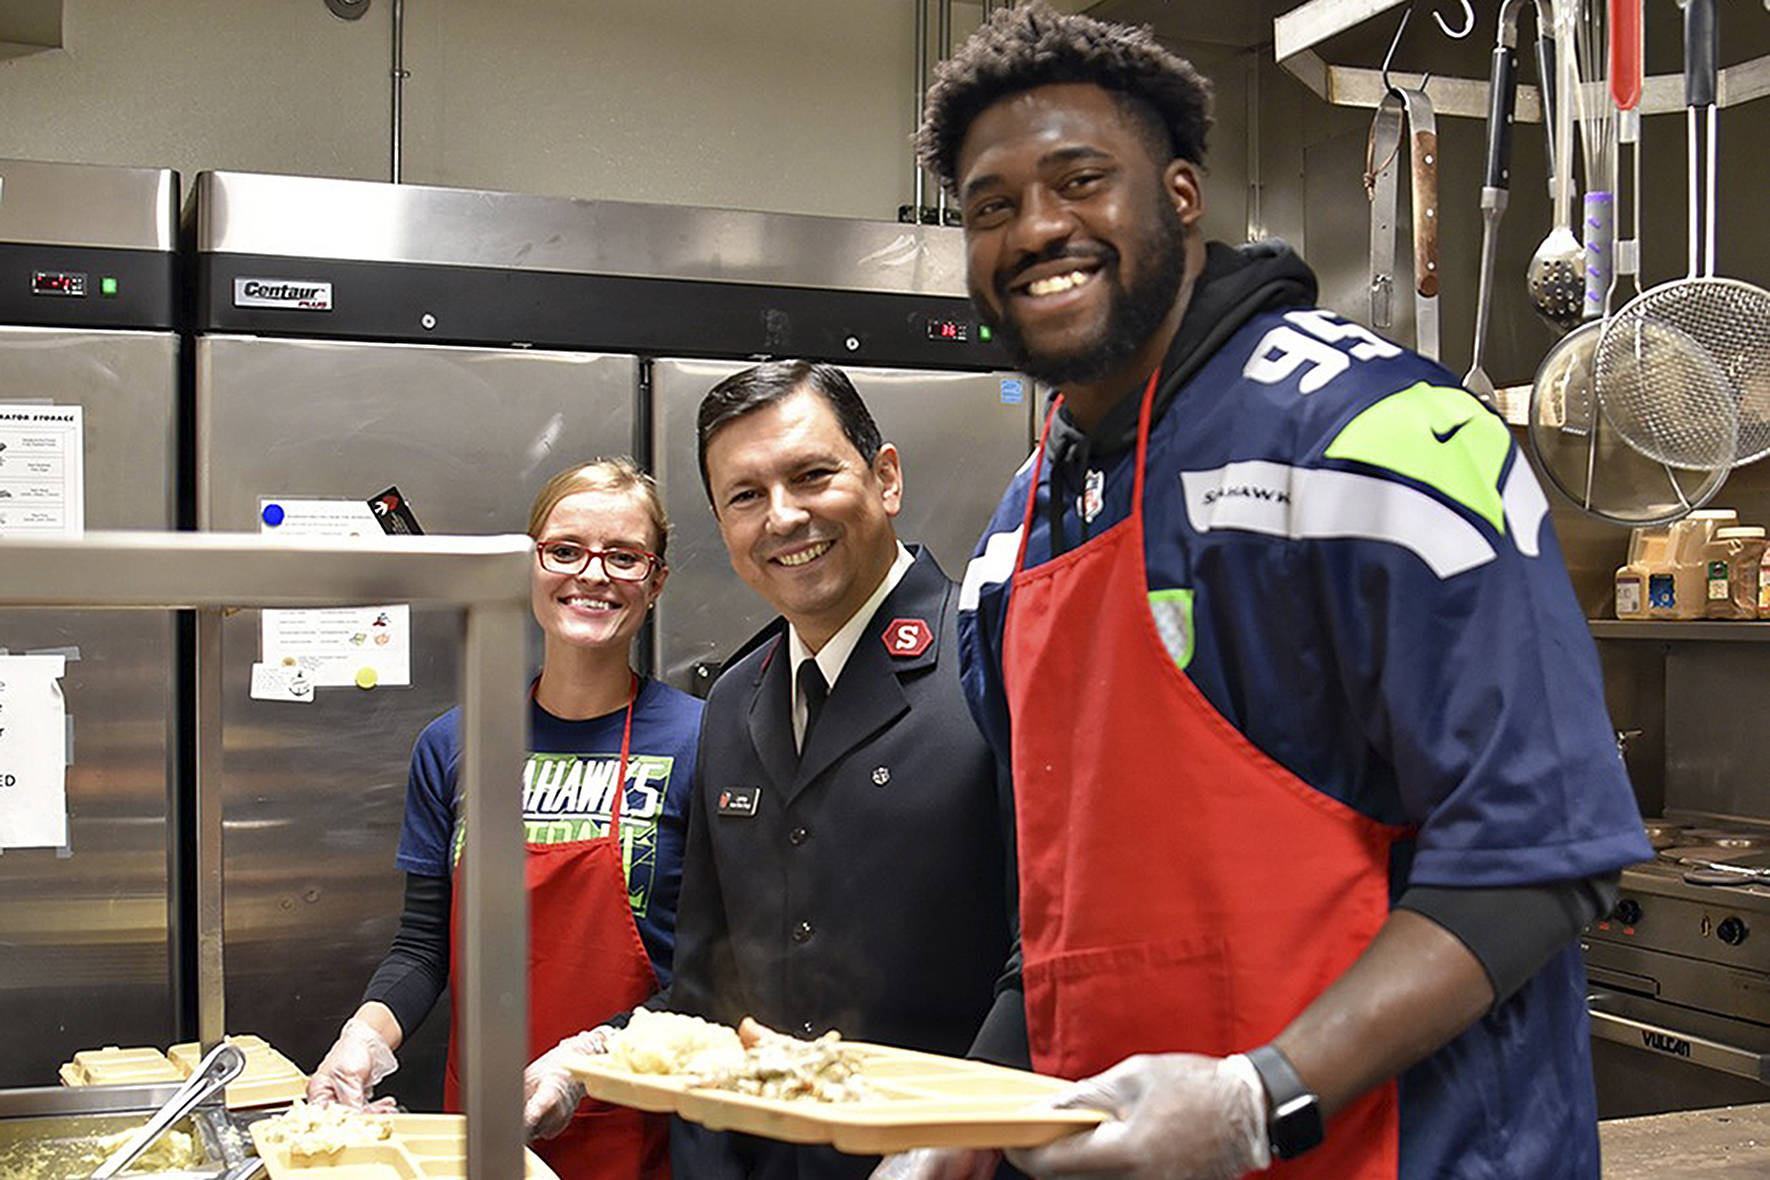 Photo by Danny Rodgers for The Salvation Army.                                Seattle Seahawks Defensive End L.J. Collier volunteers at The Salvation Army community meal on Wednesday, Nov. 26, helping serve a traditional Thanksgiving meal. The Salvation Army serves a free meal to the public, Monday through Thursday, 5:15 to 6:30 p.m. Also pictured are Captain Isaias Braga, director of The Salvation Army in Renton, and Larissa Braga, volunteer.